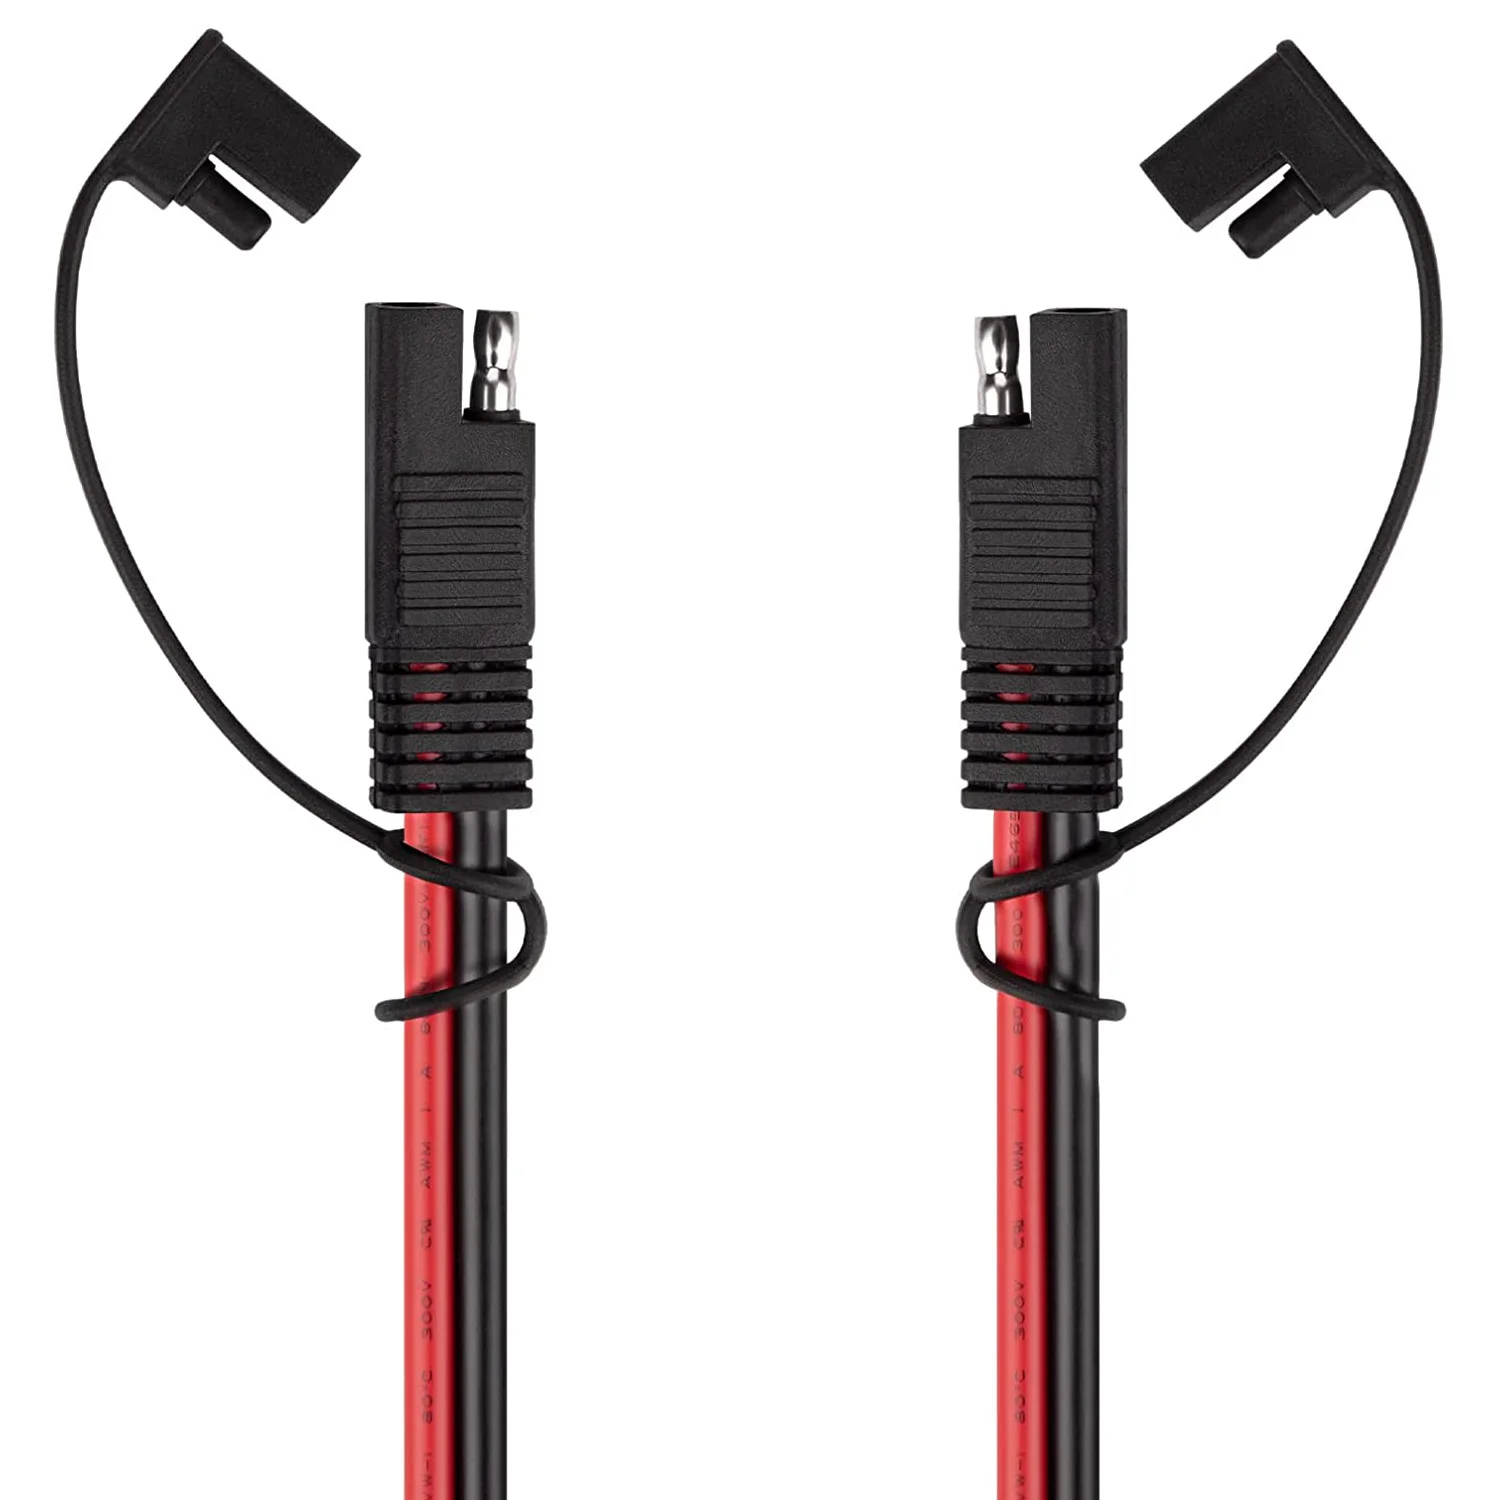 Apoi 12AWG SAE Connector Extension Cable,SAE 2 Pin Quick Connector Disconnect Plug Cable,SAE Power Automotive SAE Plug 3.3ft/1m 